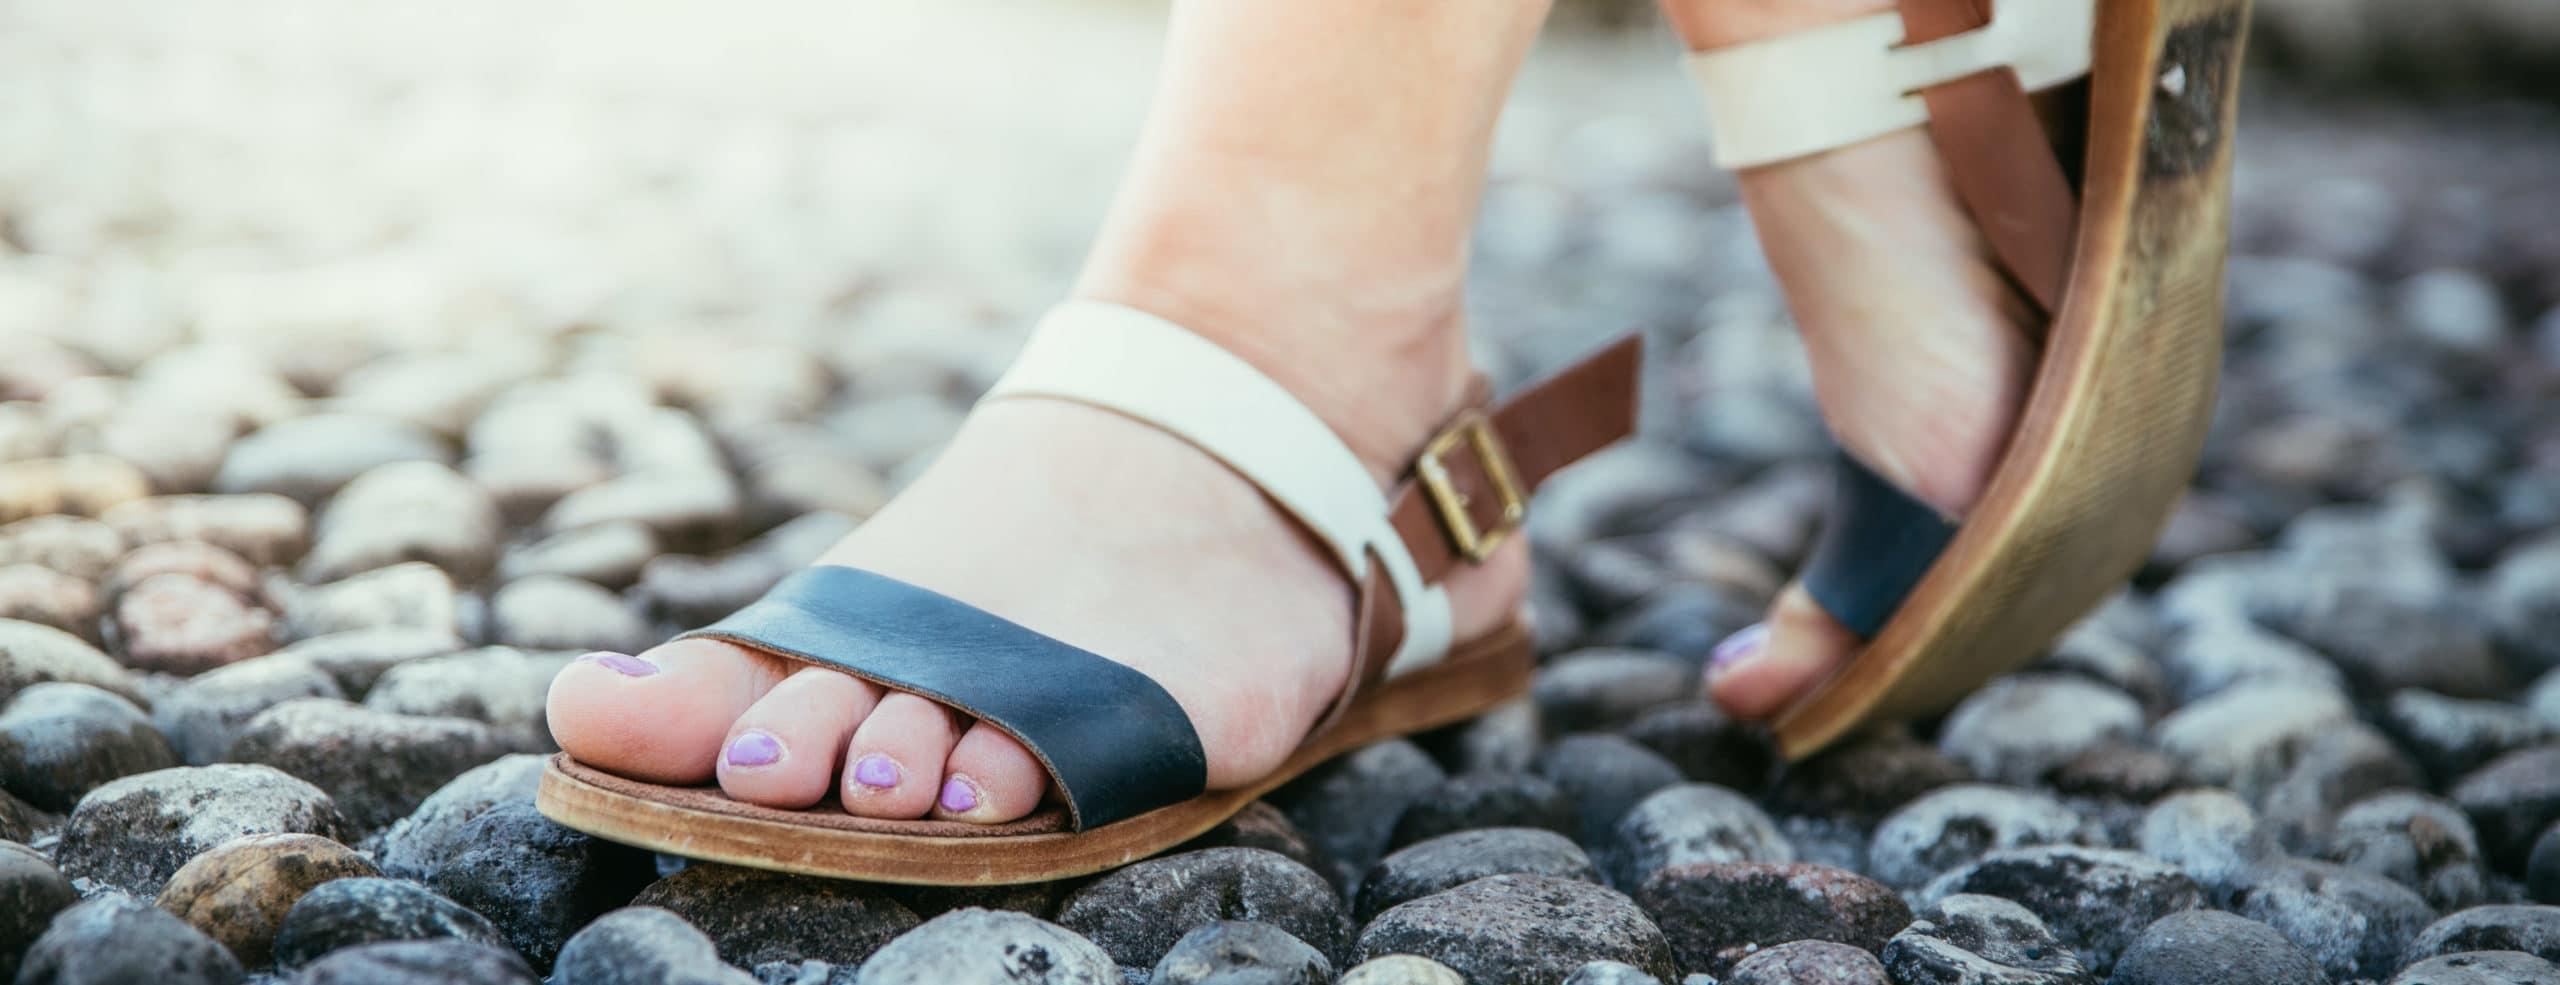 Take Care of Painful Ingrown Toenails | Southern Oregon Foot & Ankle